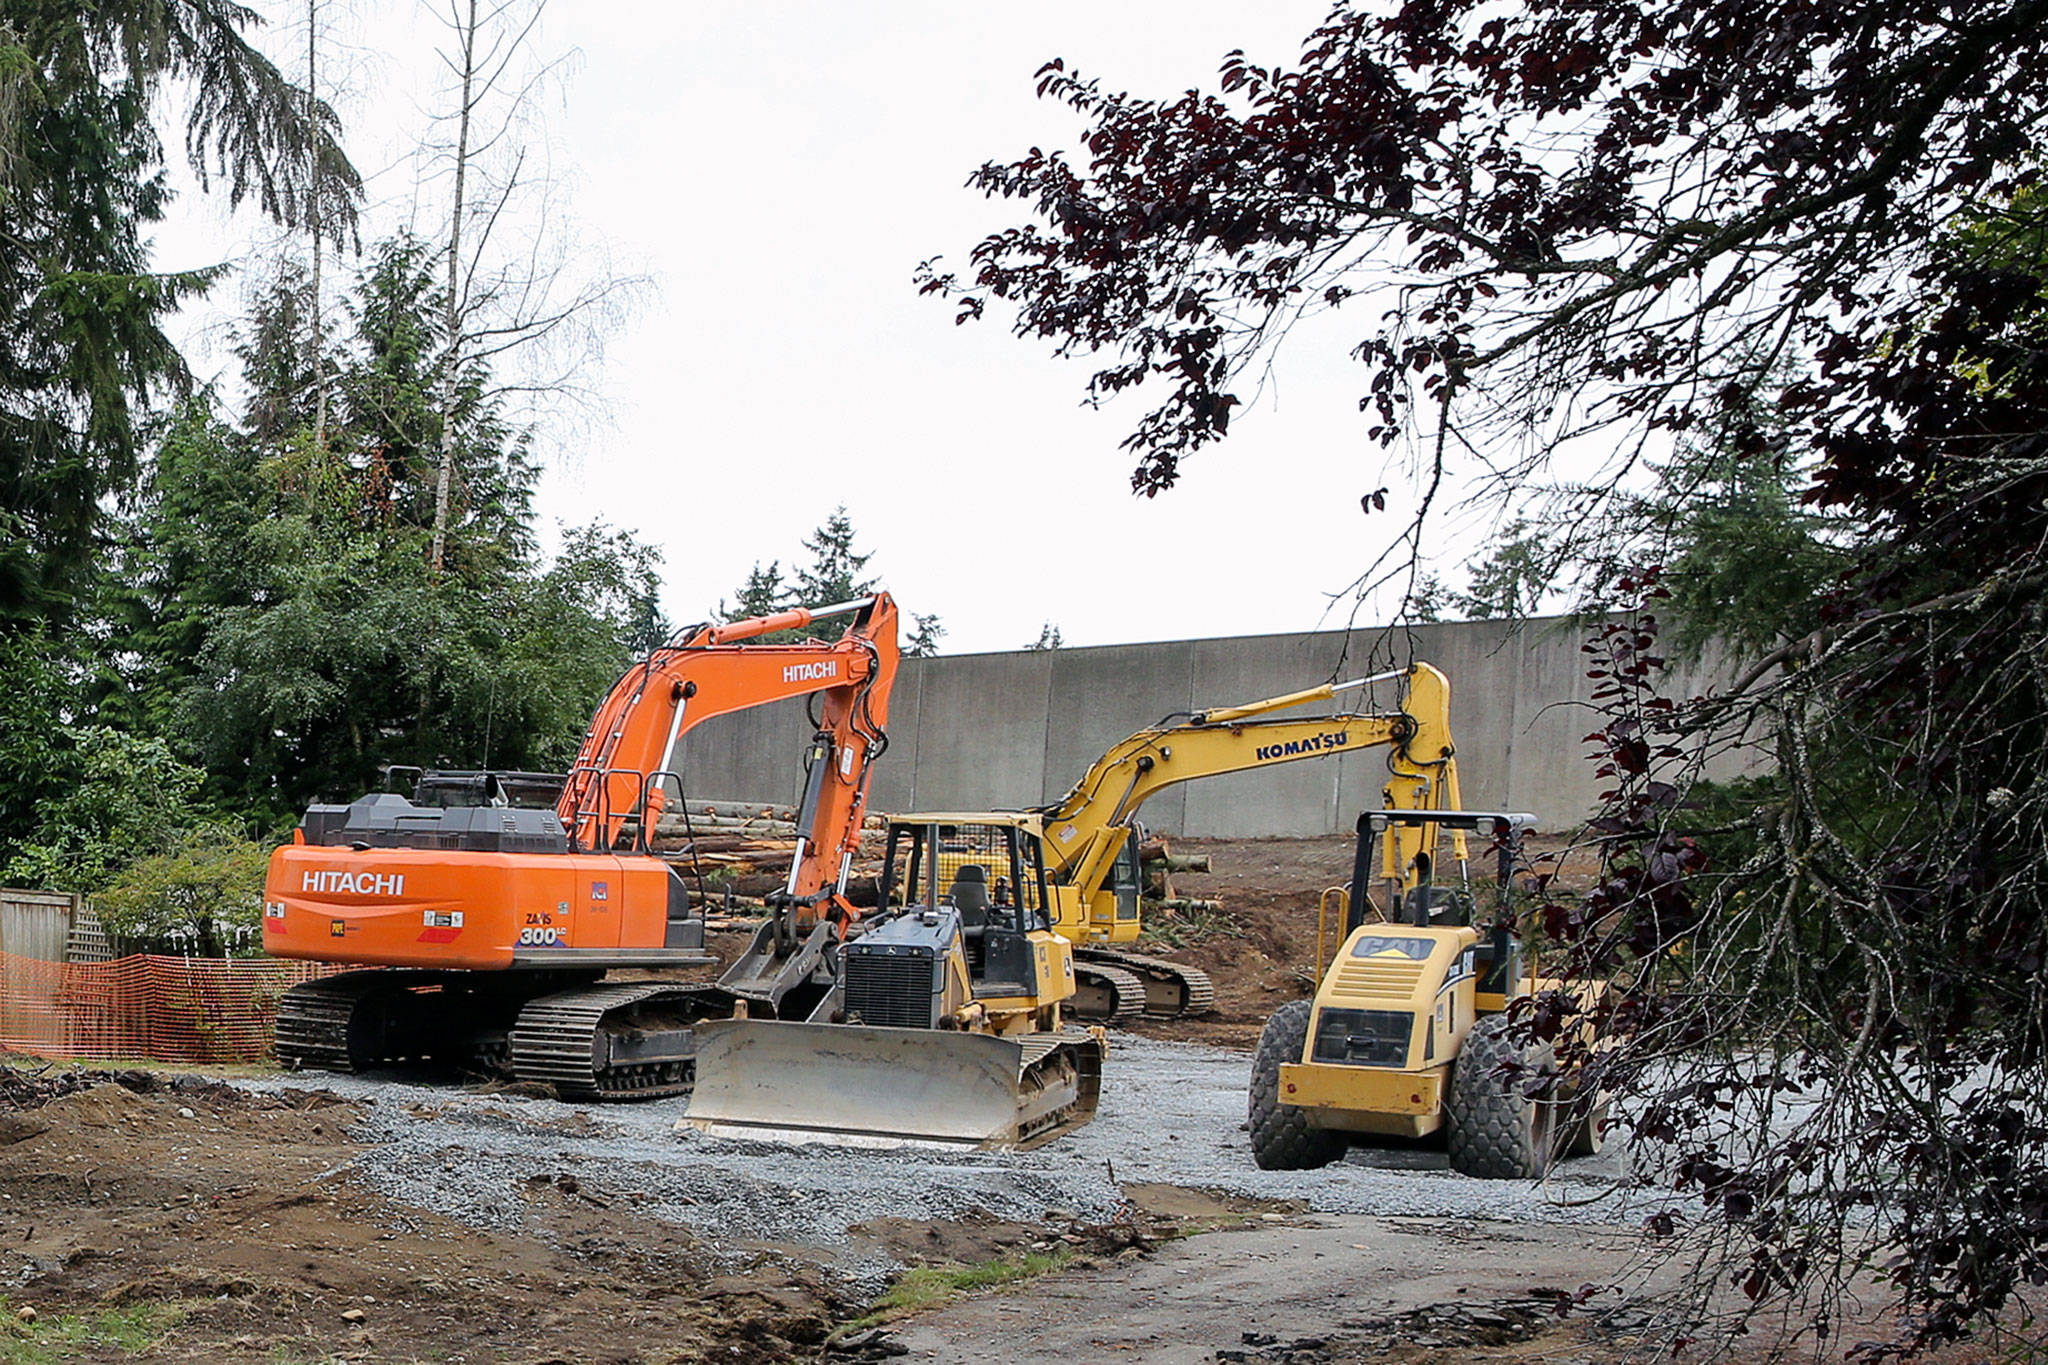 Heavy equipment is parked in former residential lots along I-5 in preparation for the light extension to Lynnwood slated to be completed in 2024. (Kevin Clark / The Herald)